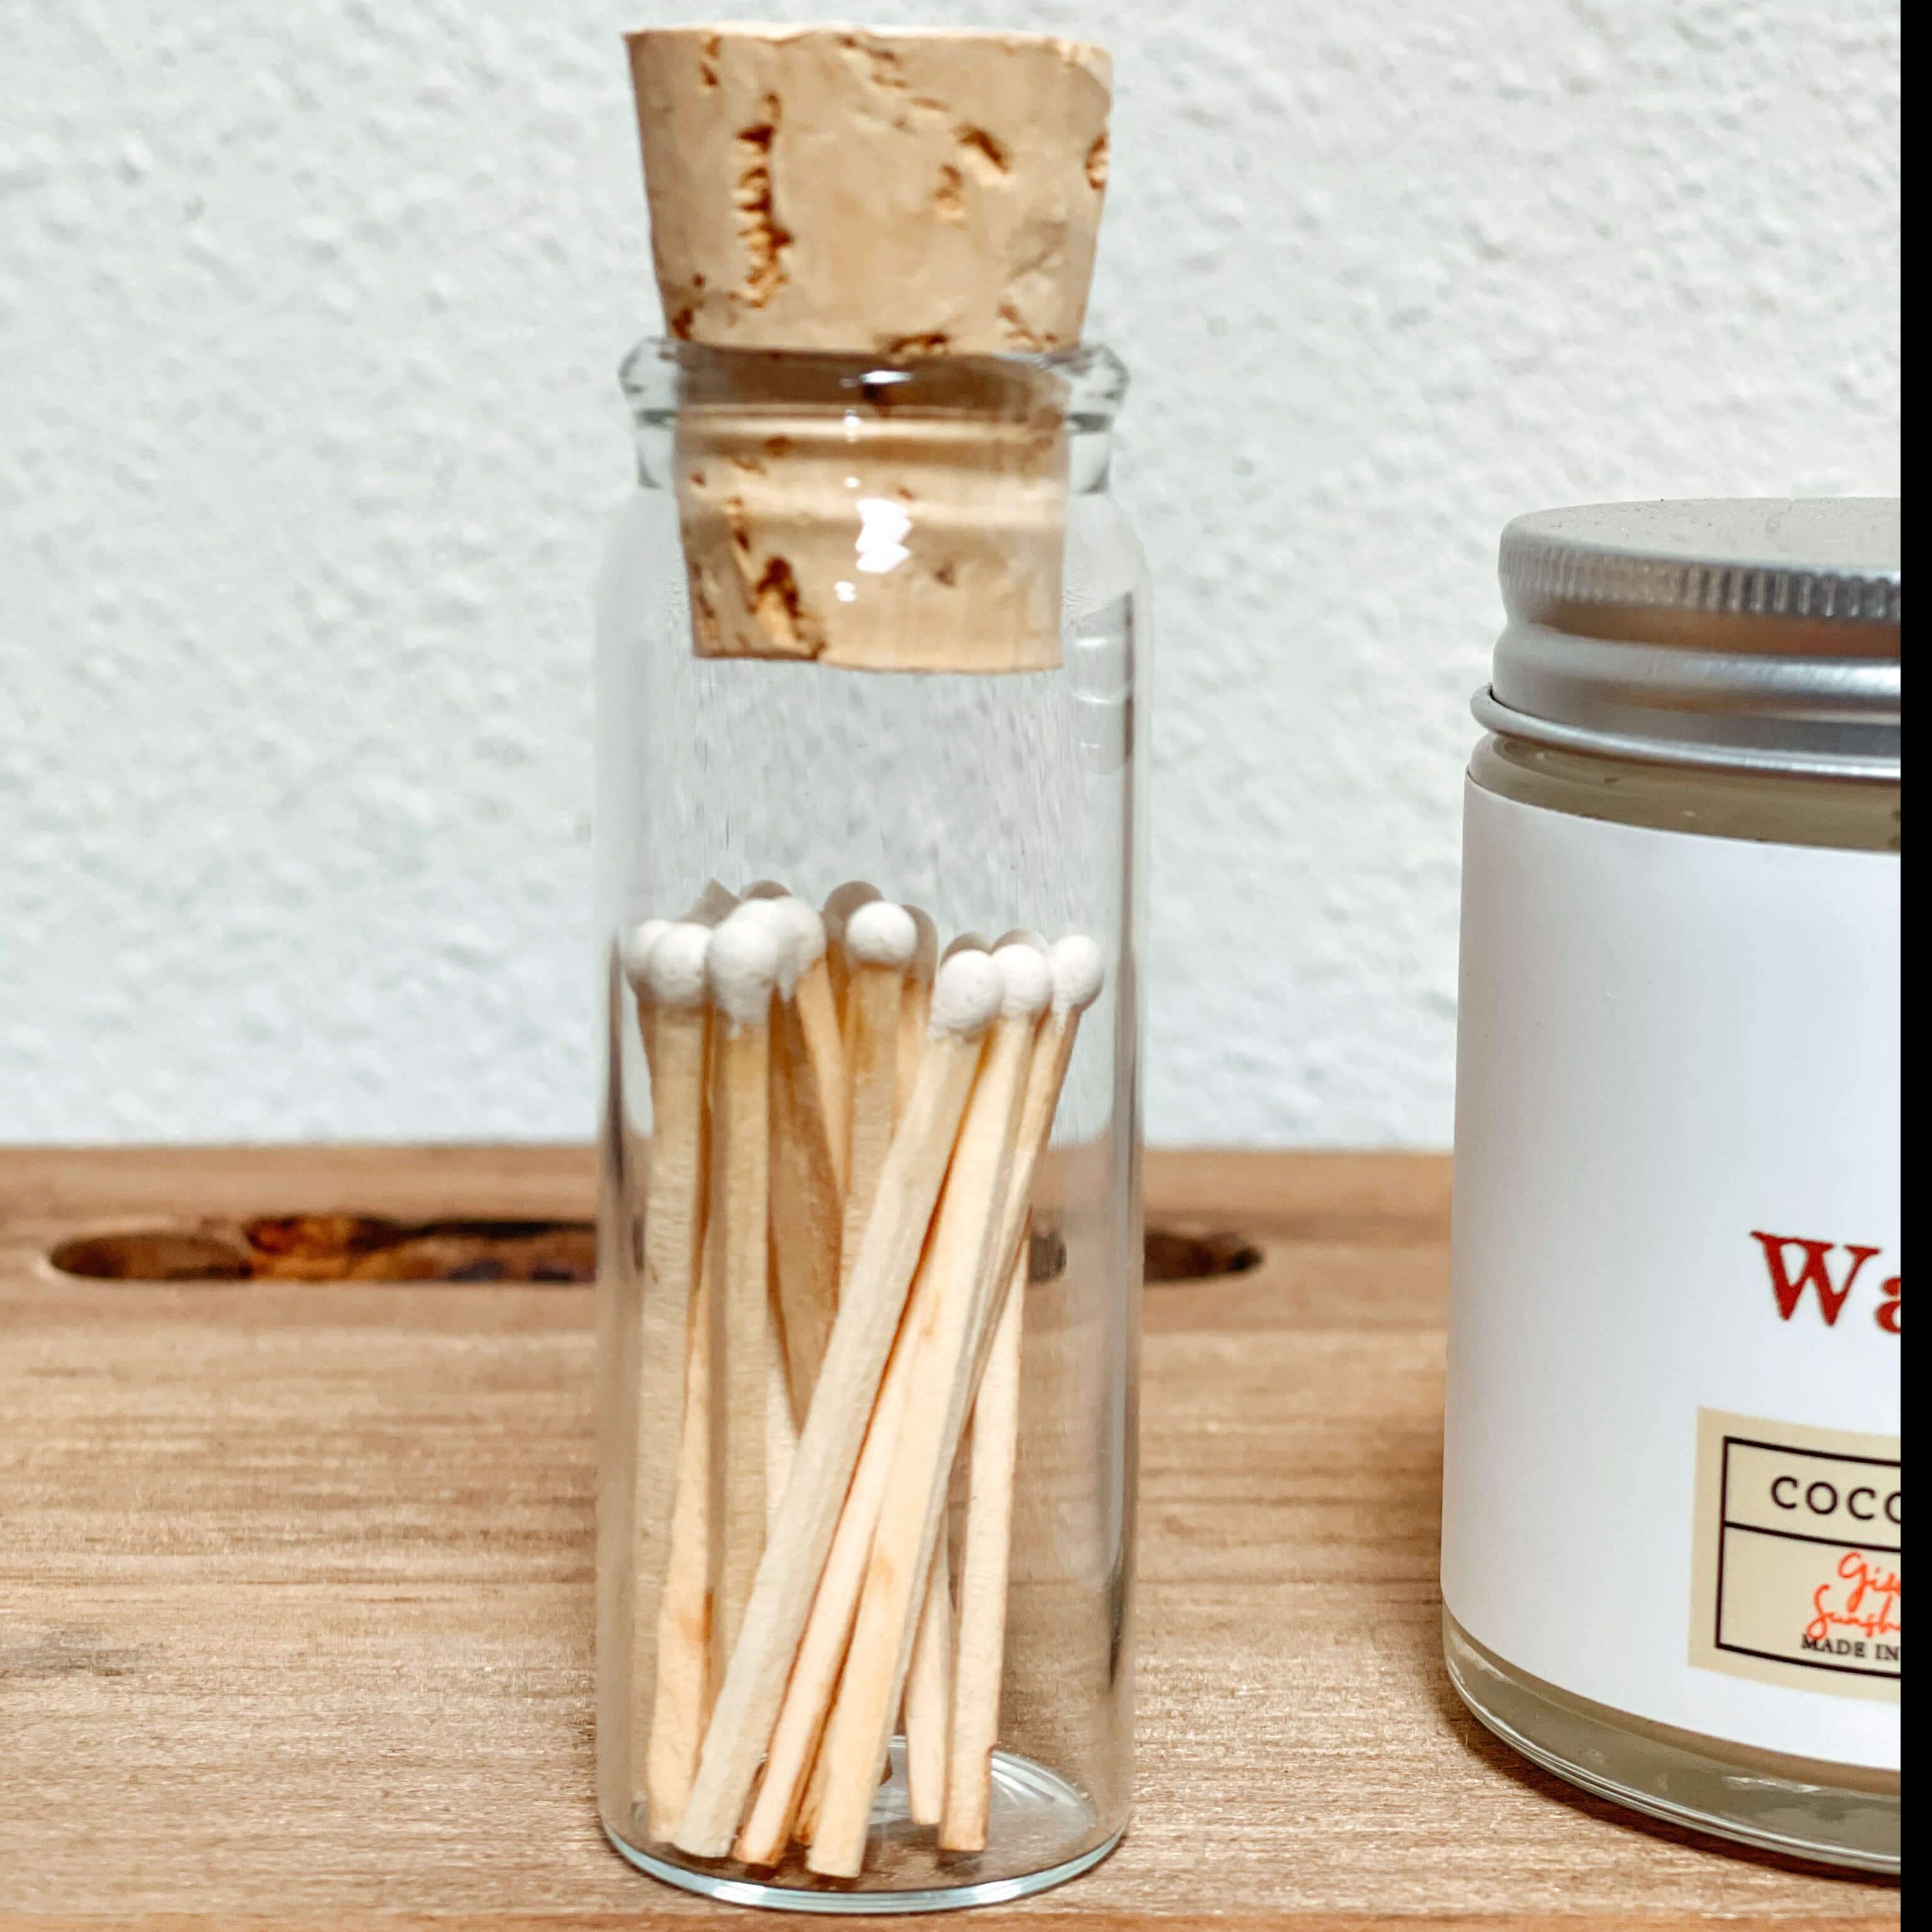 Matches in Glass Jar